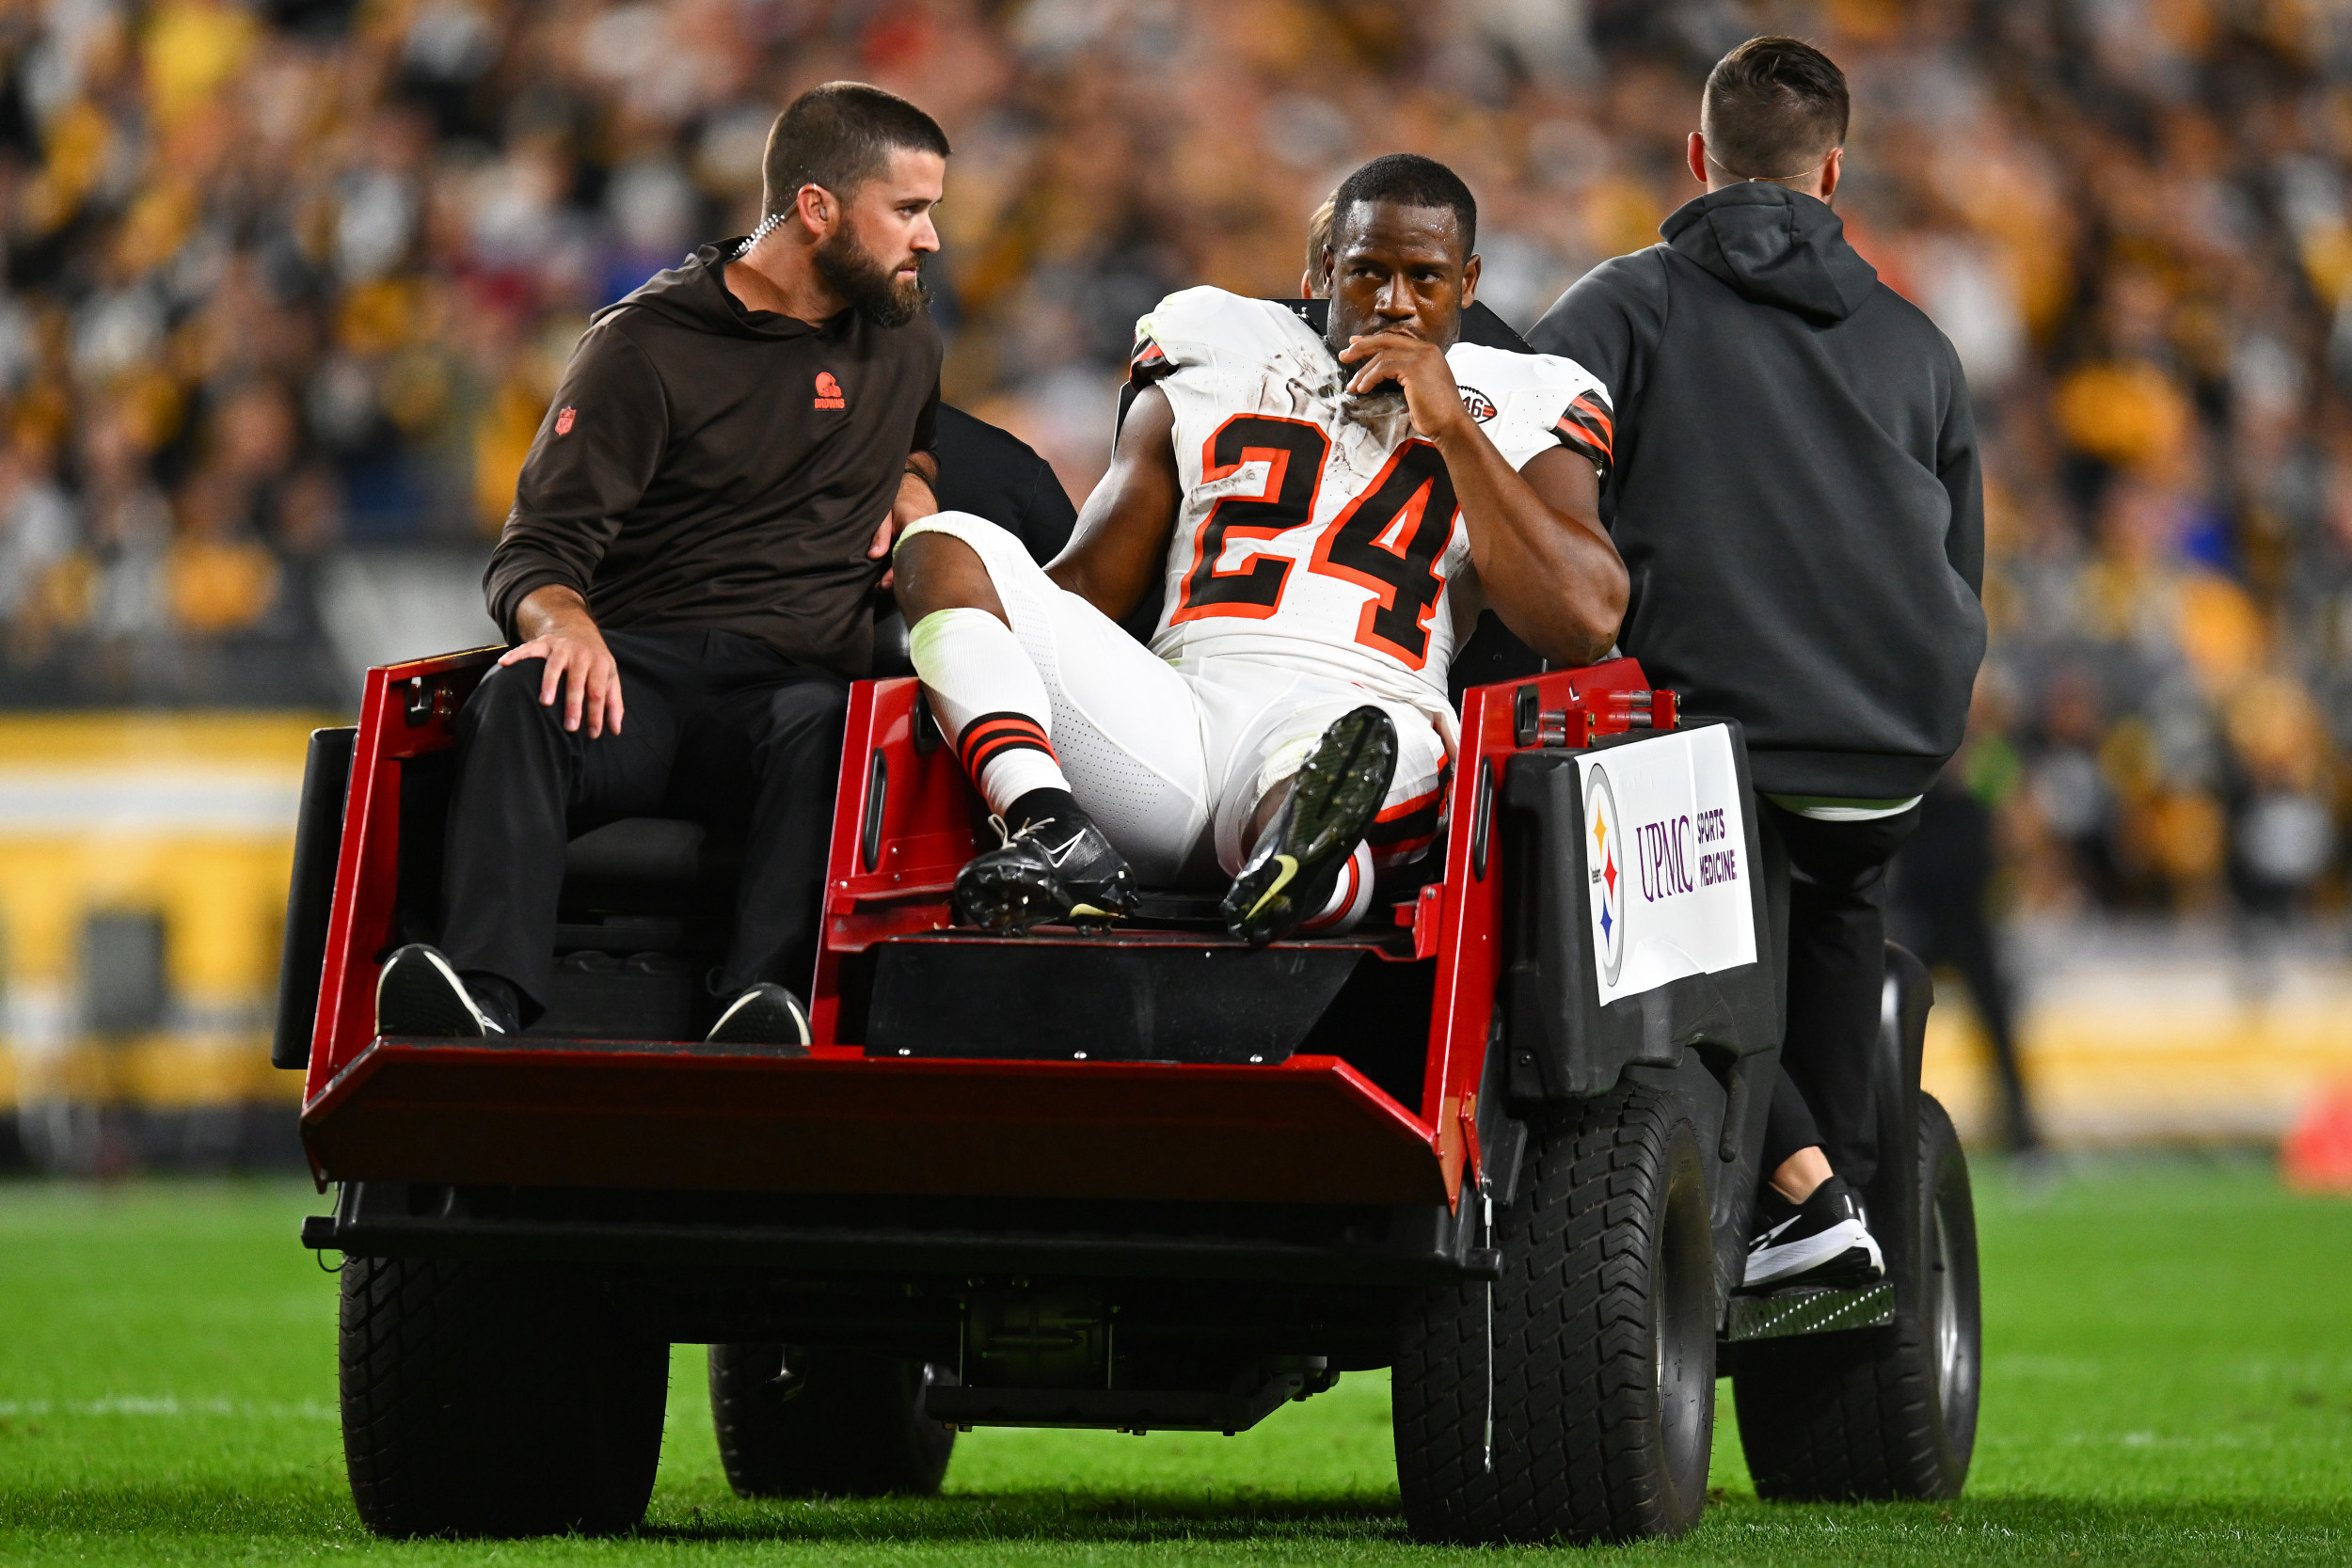 Nick Chubb Injury Browns RB Options With Pro Bowler Likely Out for Season